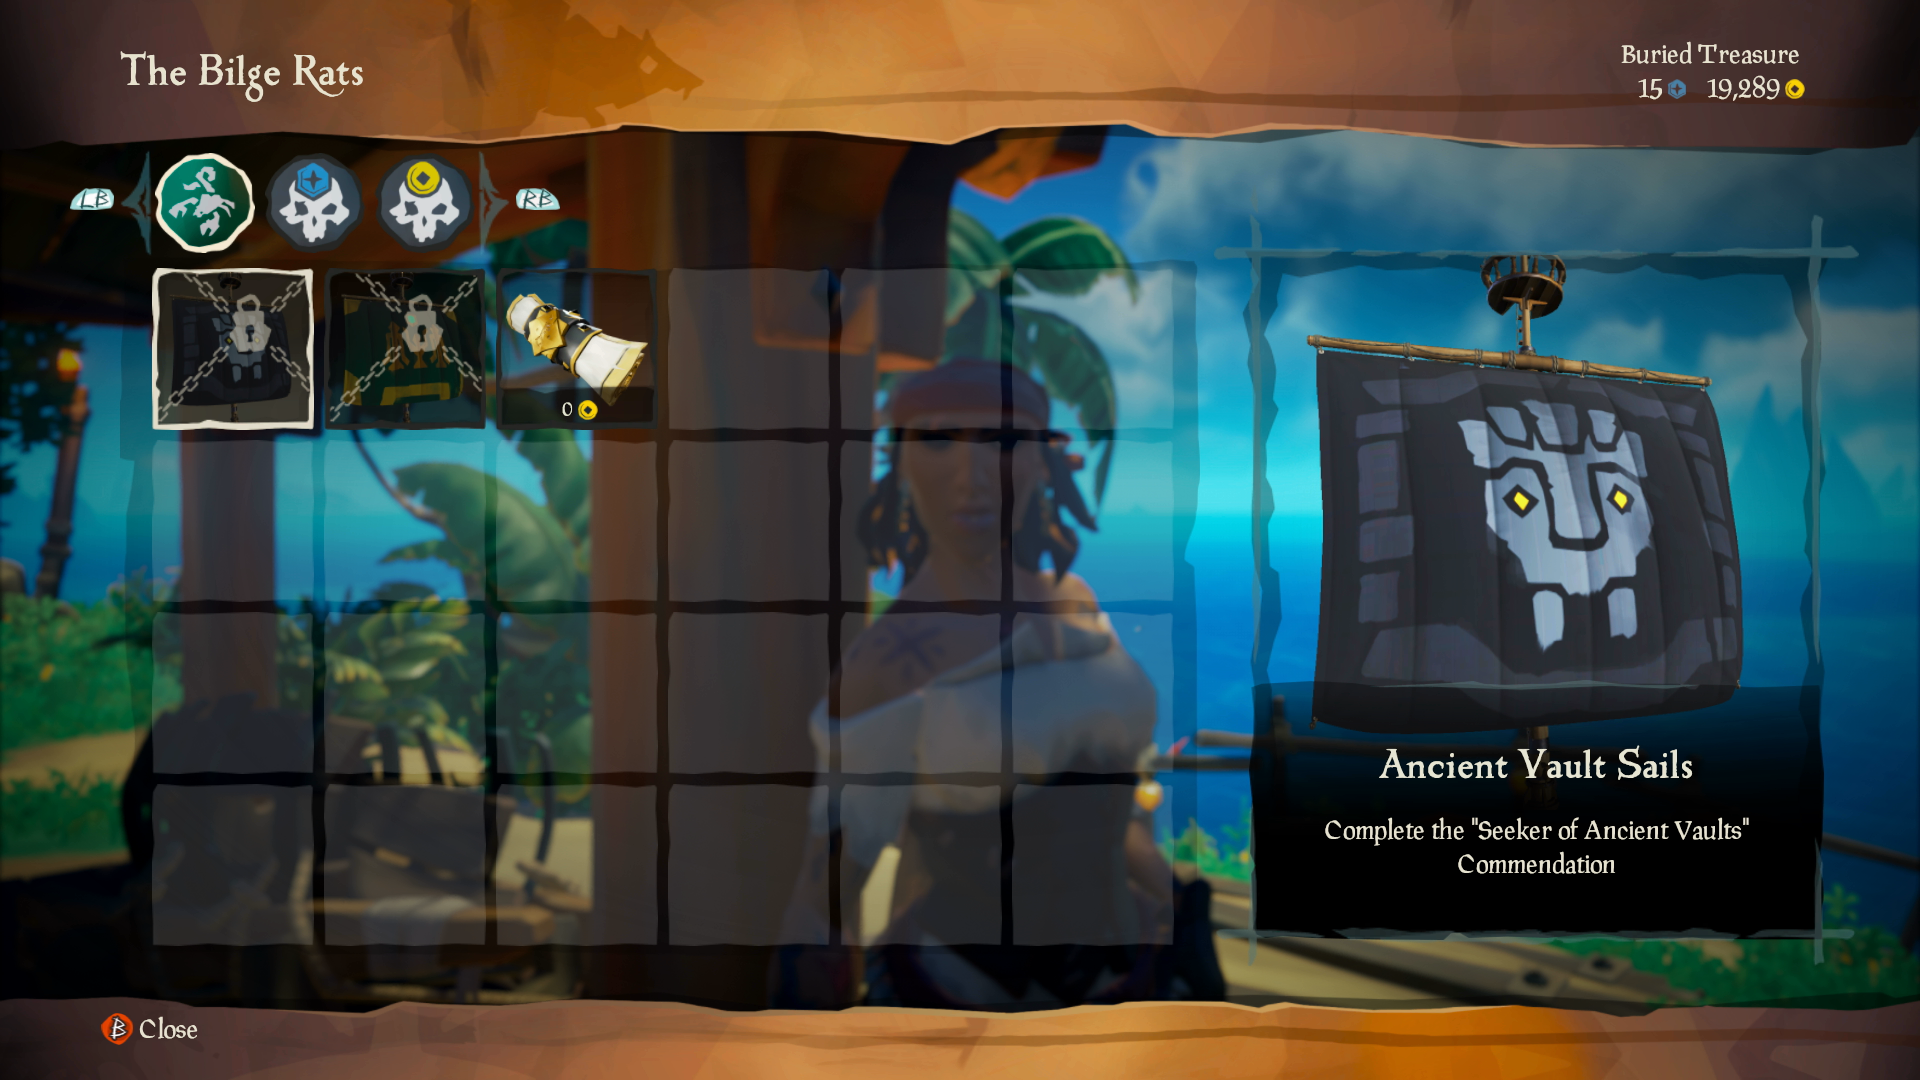 Sea of Thieves store menu. The player is focused on an item called "ancient vault sails." The item is locked, so the icon is grayed out with chains and has a lock symbol on it.